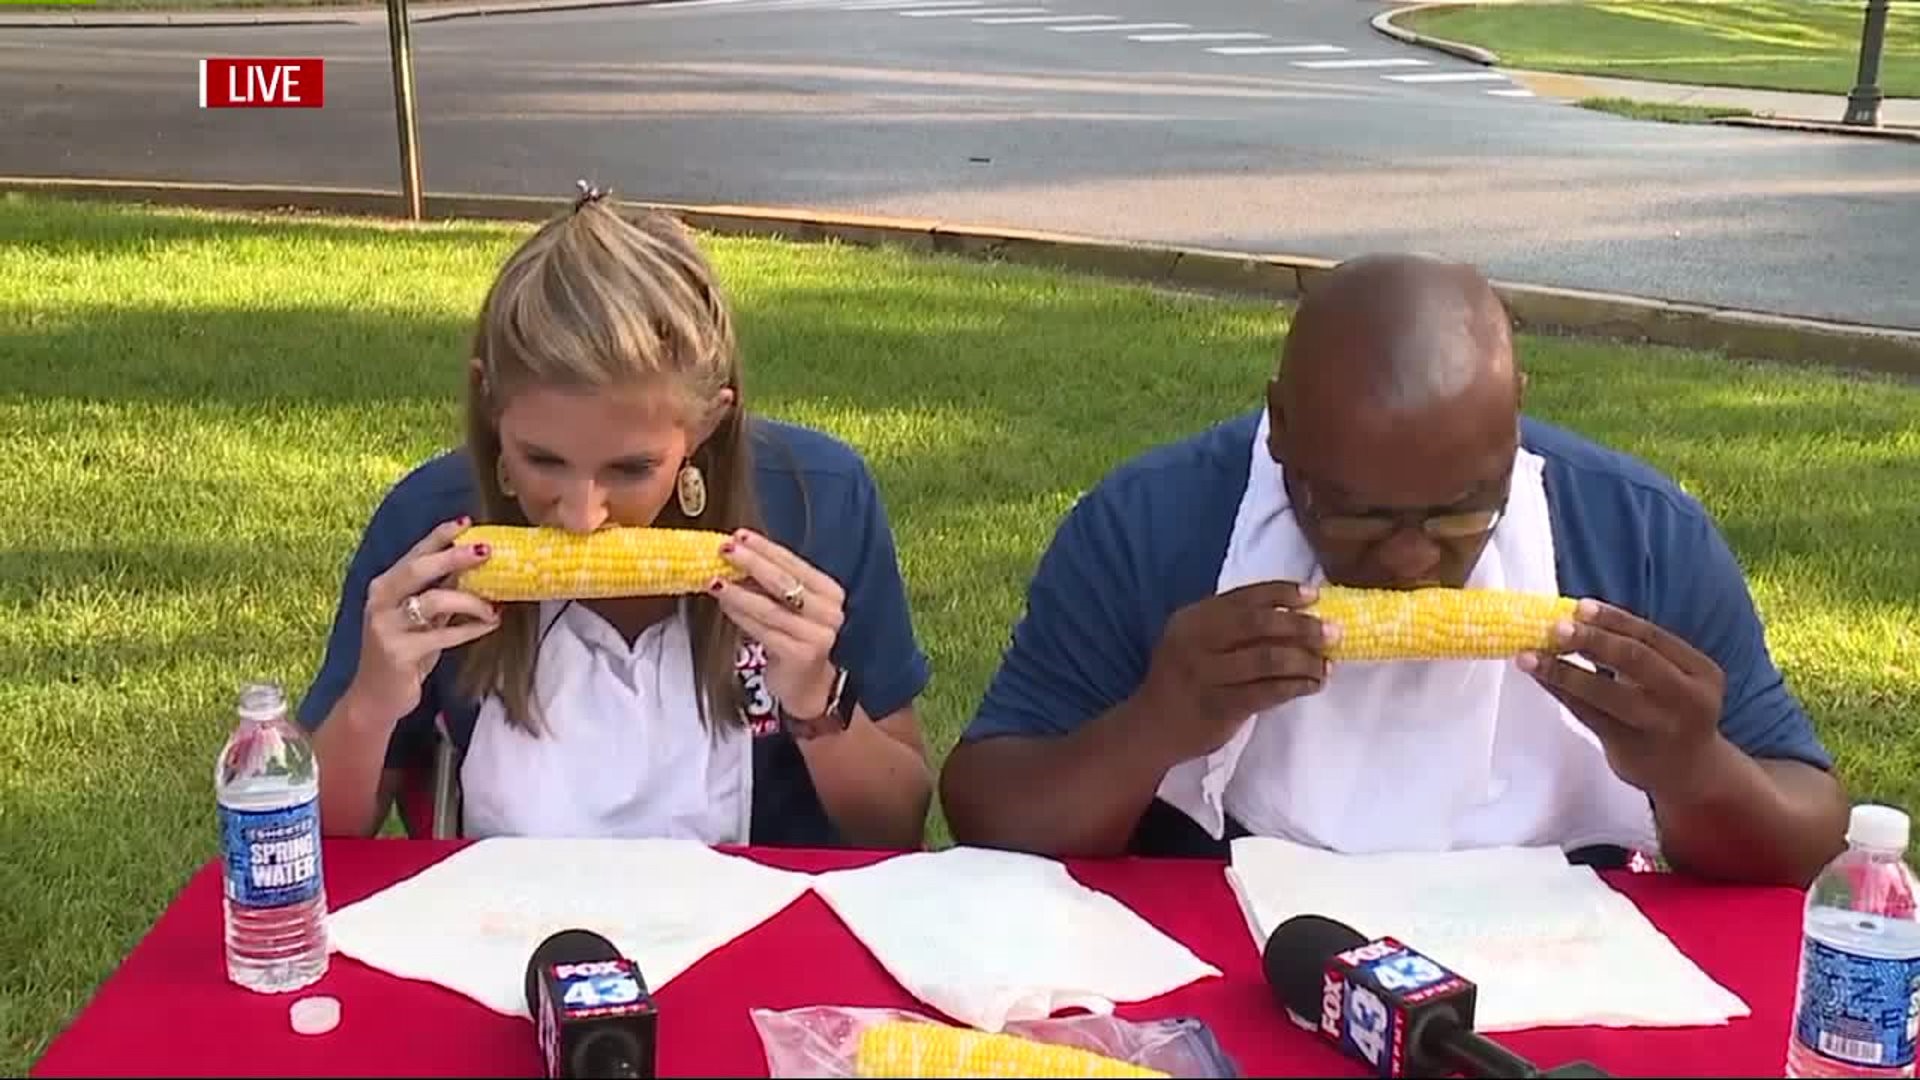 Live and Local Jen and Chris go head to head in a corn eating contest